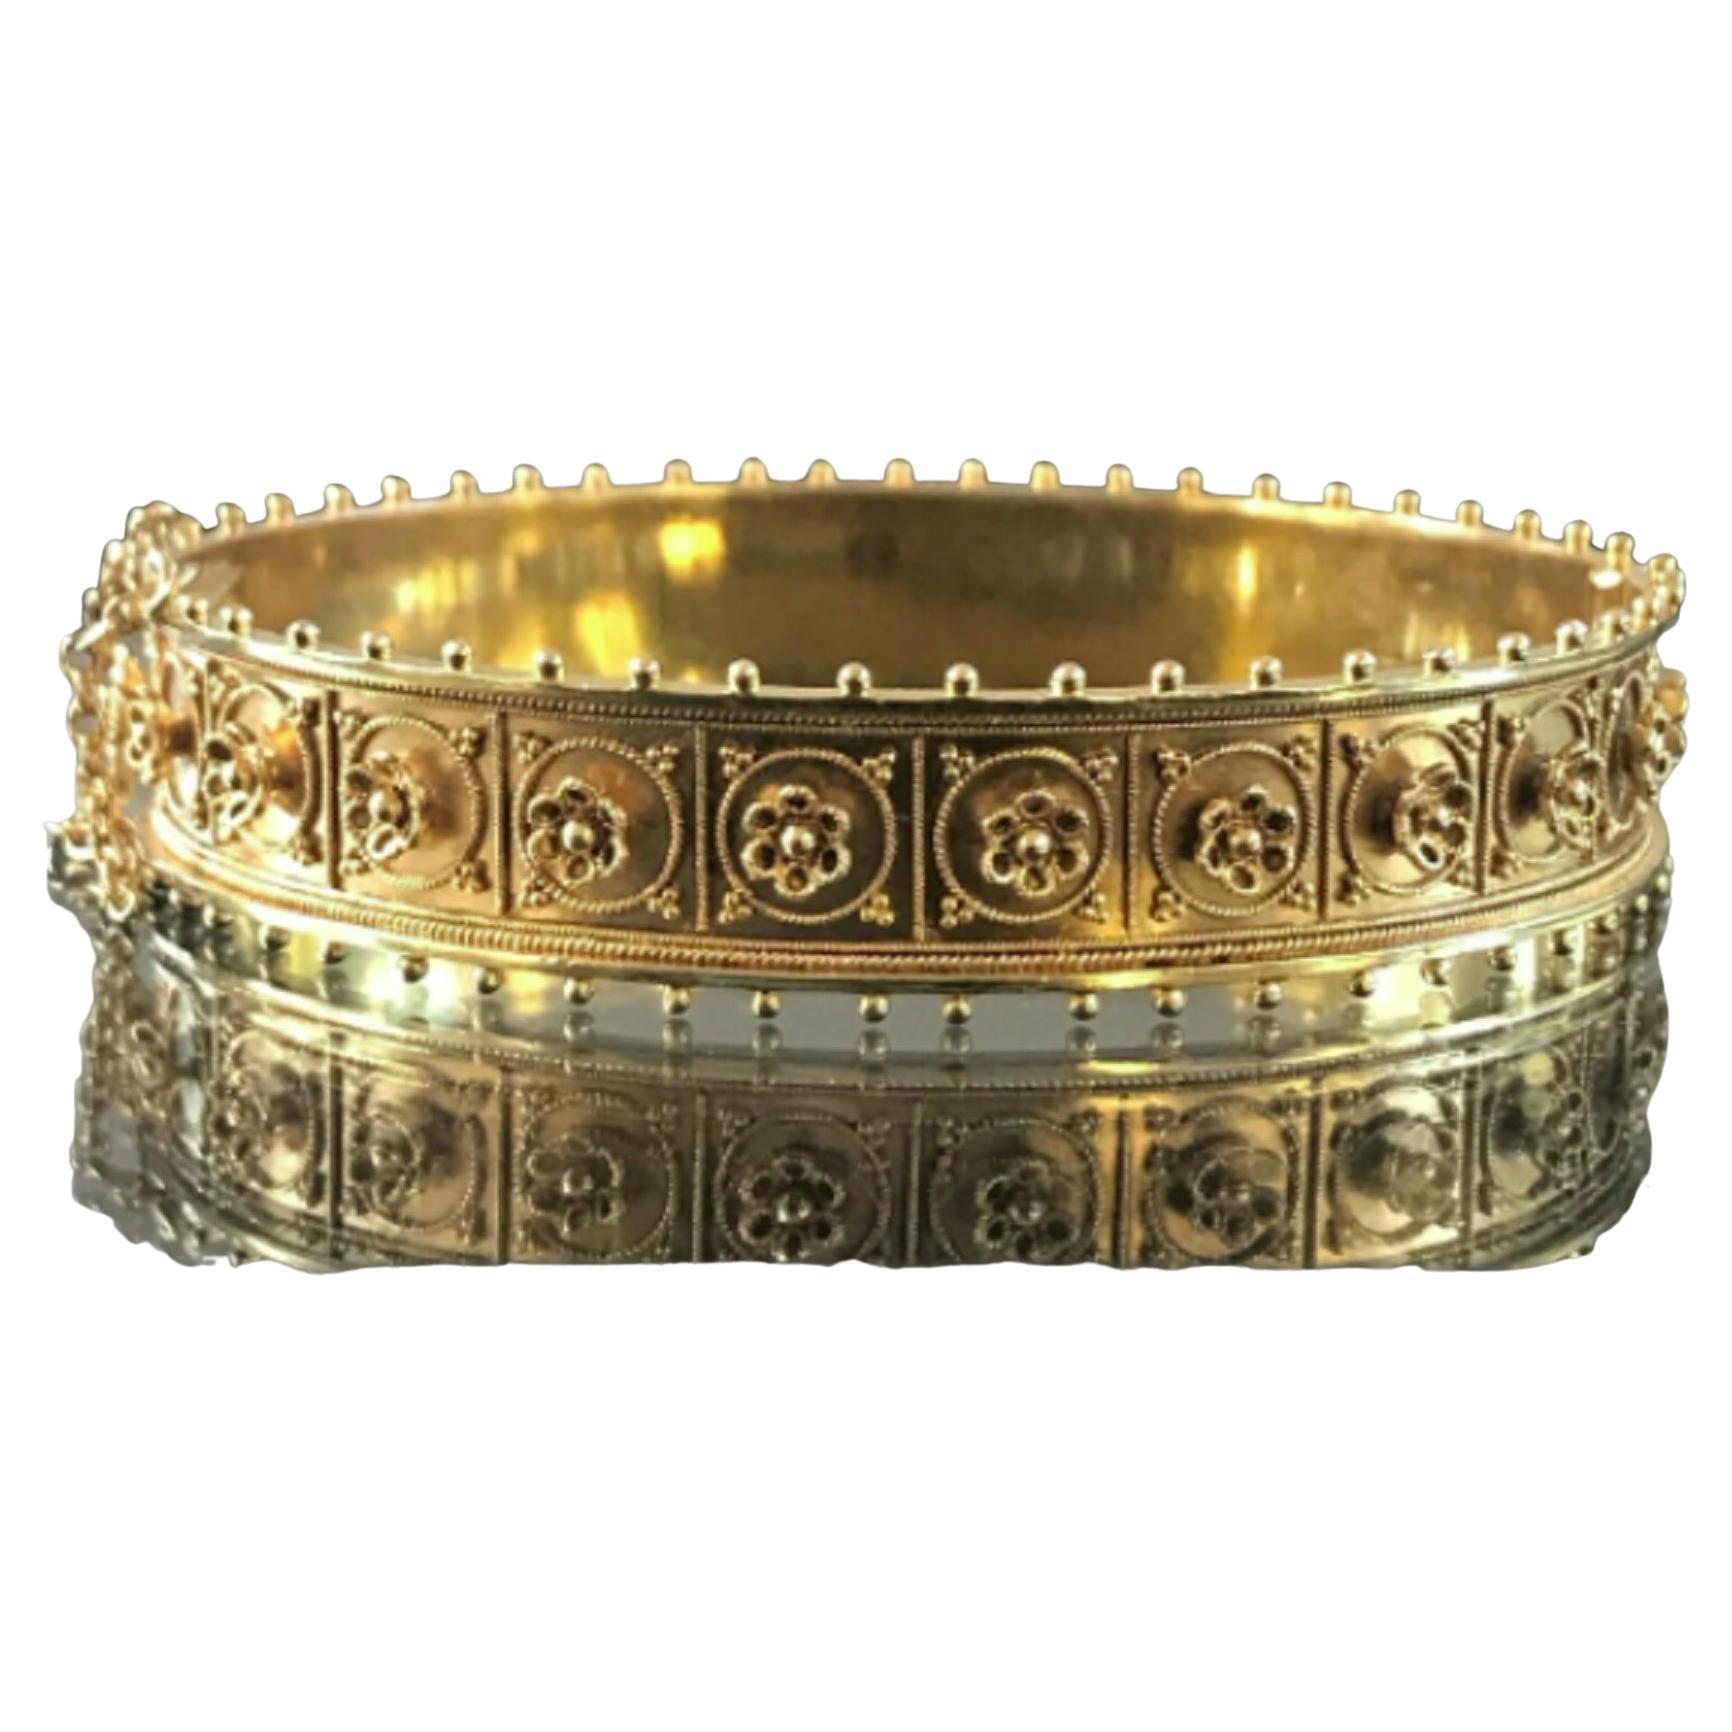 Etruscan Revival 15 Karat yellow gold Granulation Bracelet weighting 23 gram, flower pattern, no damage, made in 1880s. Fits 7-7.5 inch wrist, 1/2 inch wide in excellent condition considering its 140 years of age, marked 